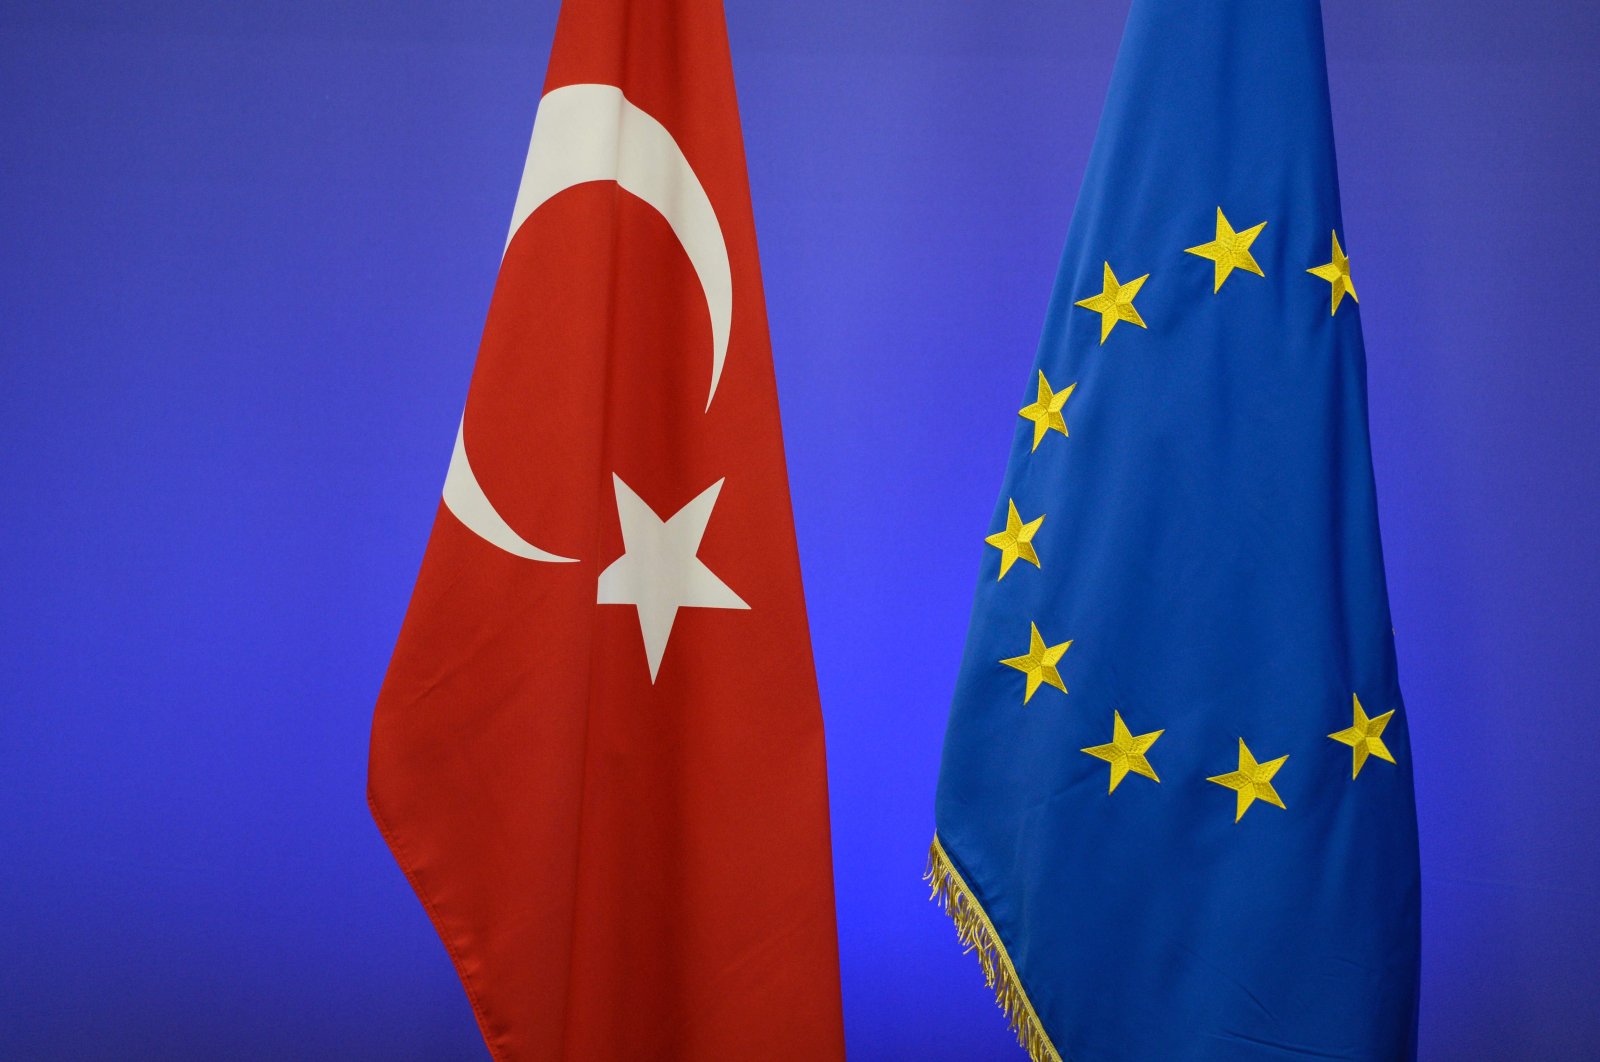 This file photo taken on Nov. 29, 2015, shows the Turkish national flag (L) and the EU flag ahead of a summit on relations between the European Union and Turkey on managing the migration crisis, in Brussels, Belgium. (AFP File Photo)